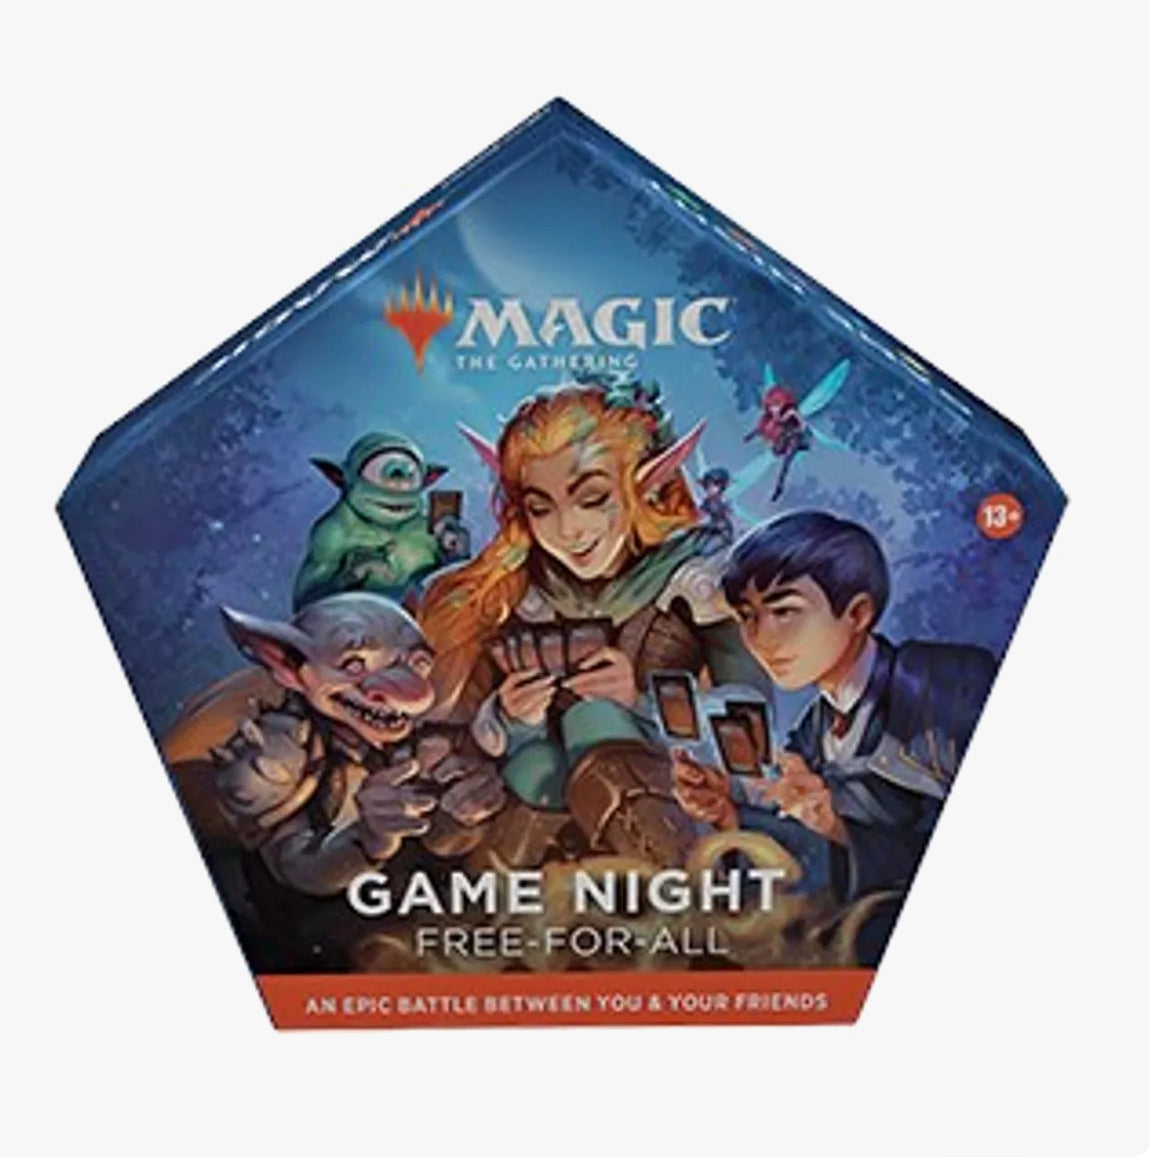 Game Night - Free for all